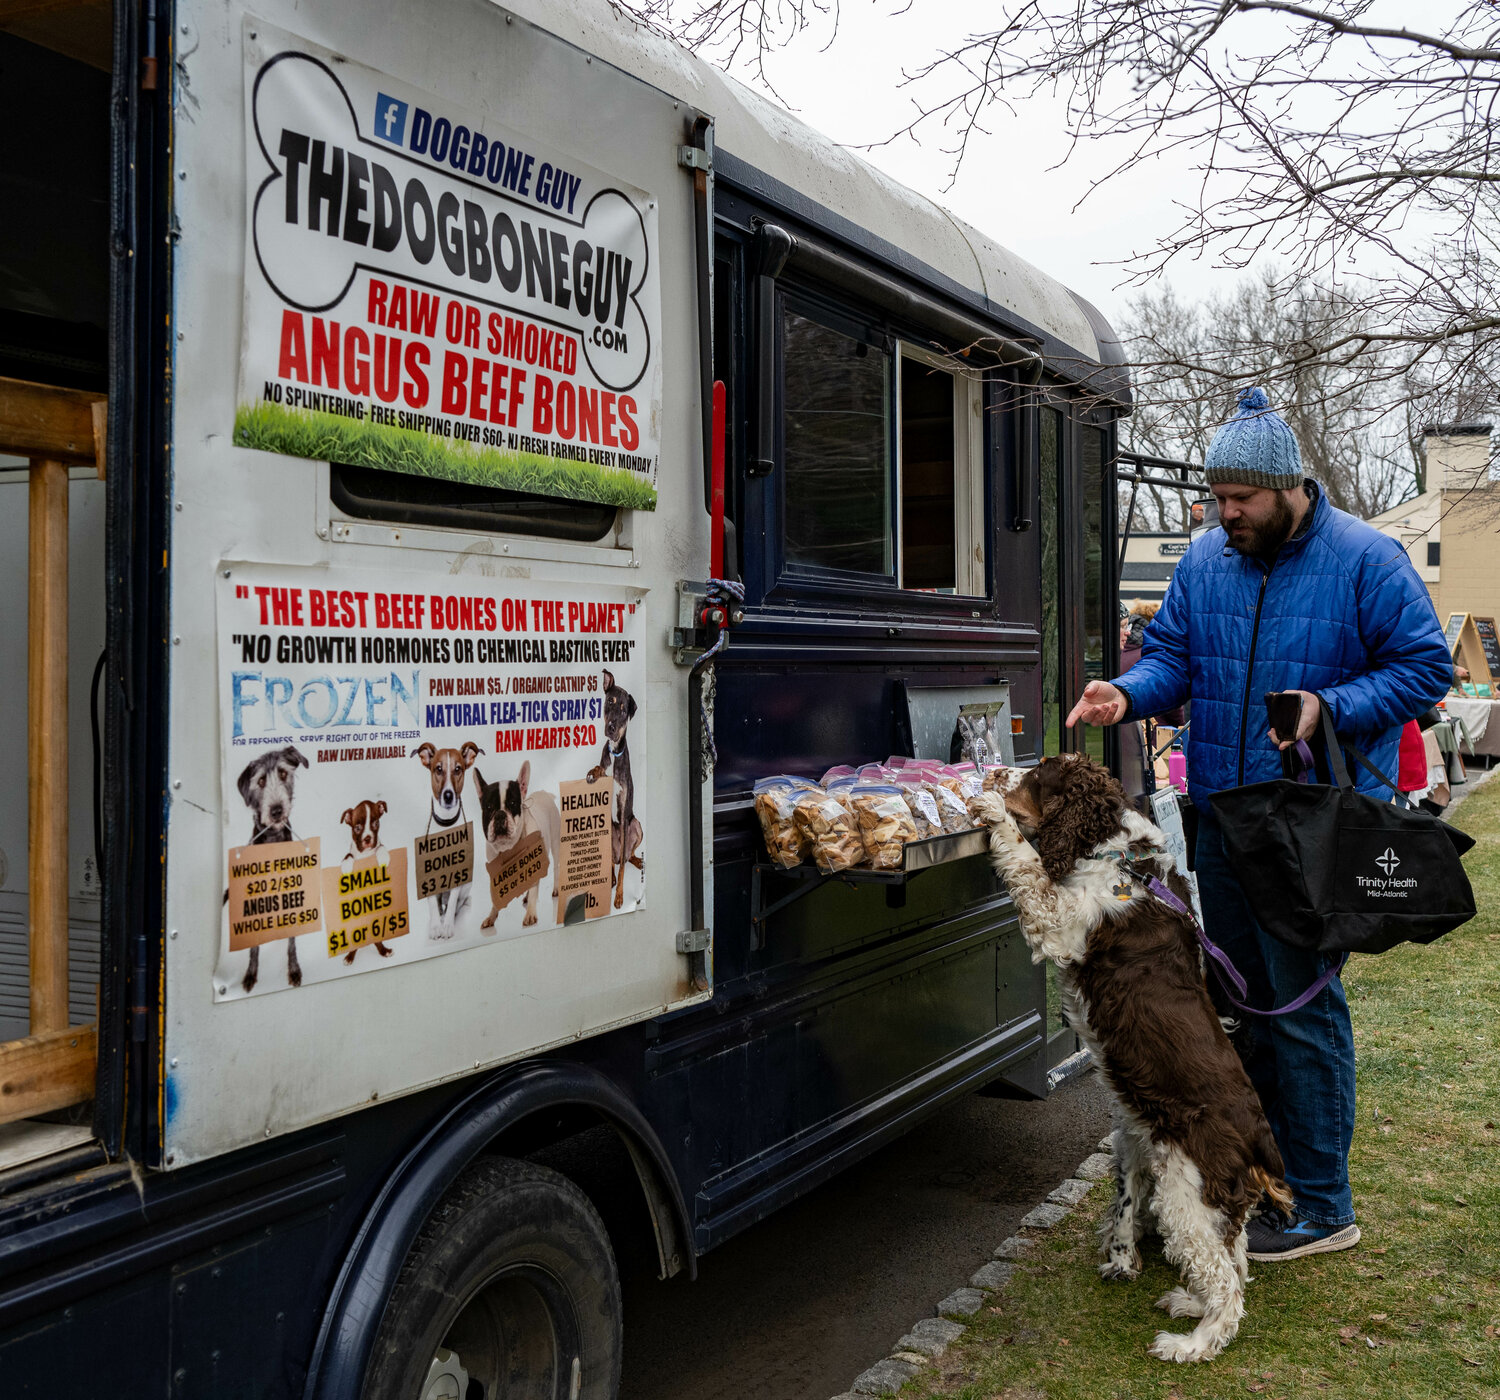 Sam Bever and his dog, Echo, check out the inventory at The Dog Bone Guy’s truck.